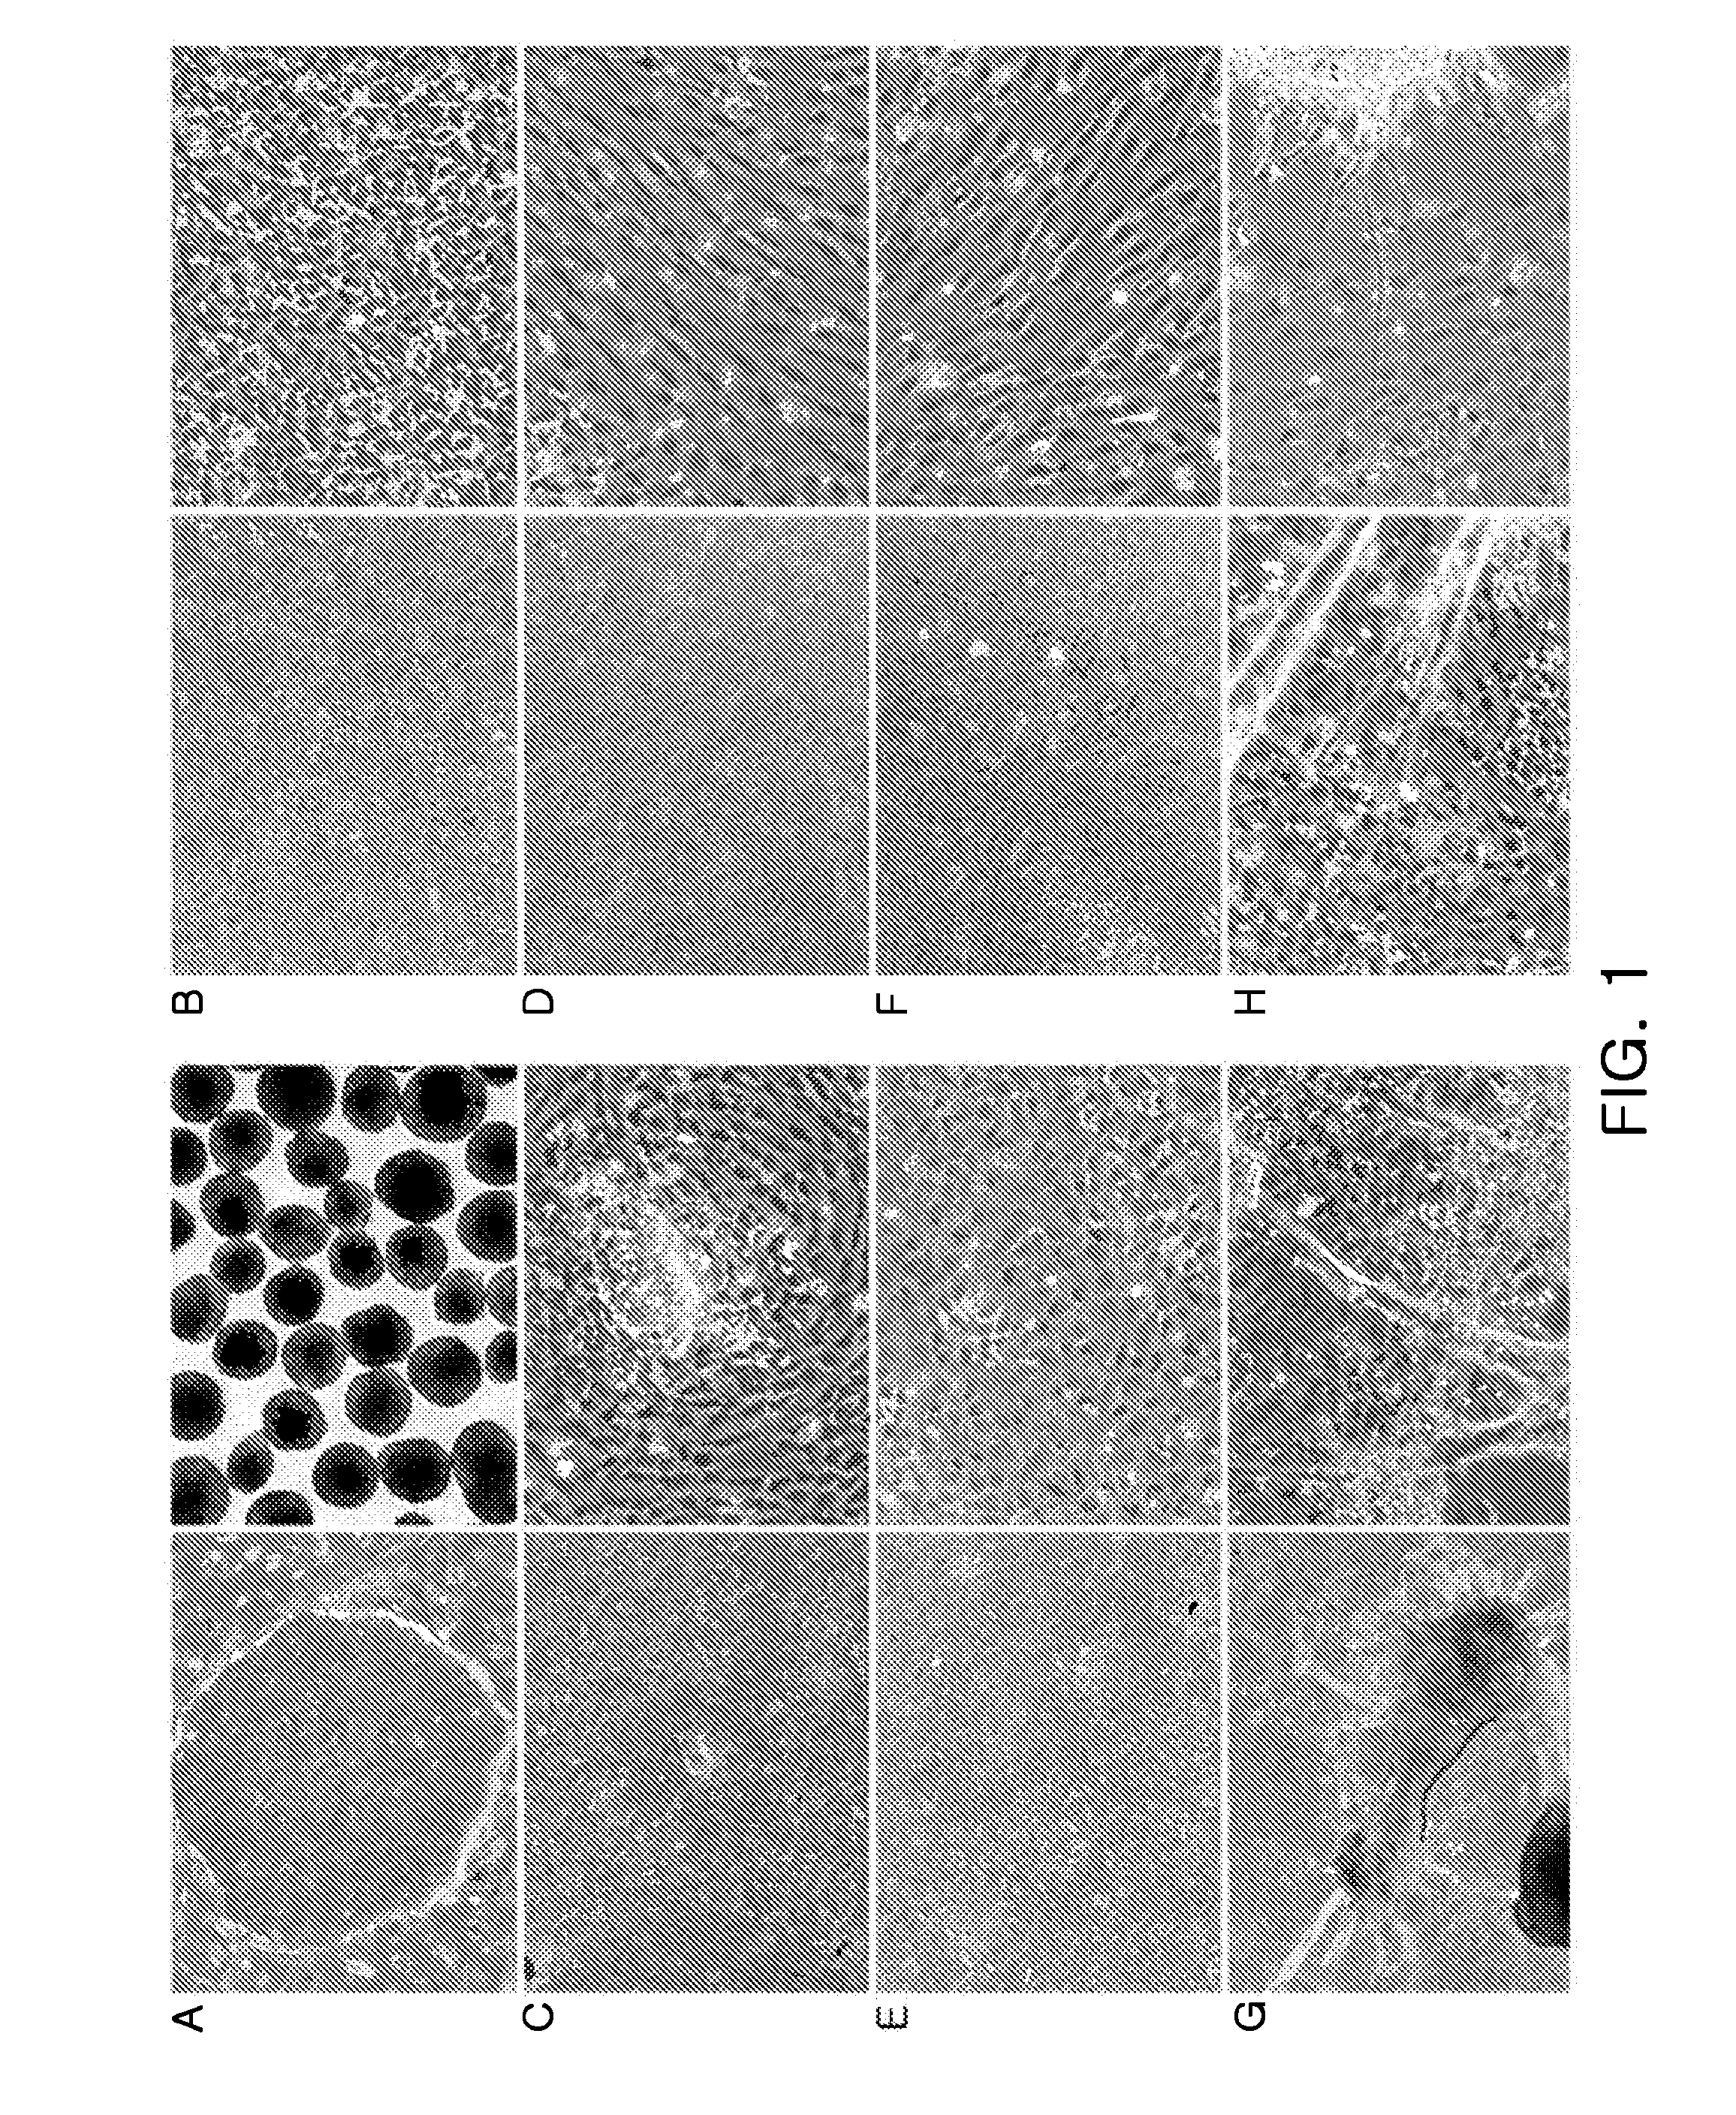 Compositions for inducing differentiation into retinal cells from retinal progenitor cells or inducing proliferation of retinal cells comprising wnt signaling pathway activators